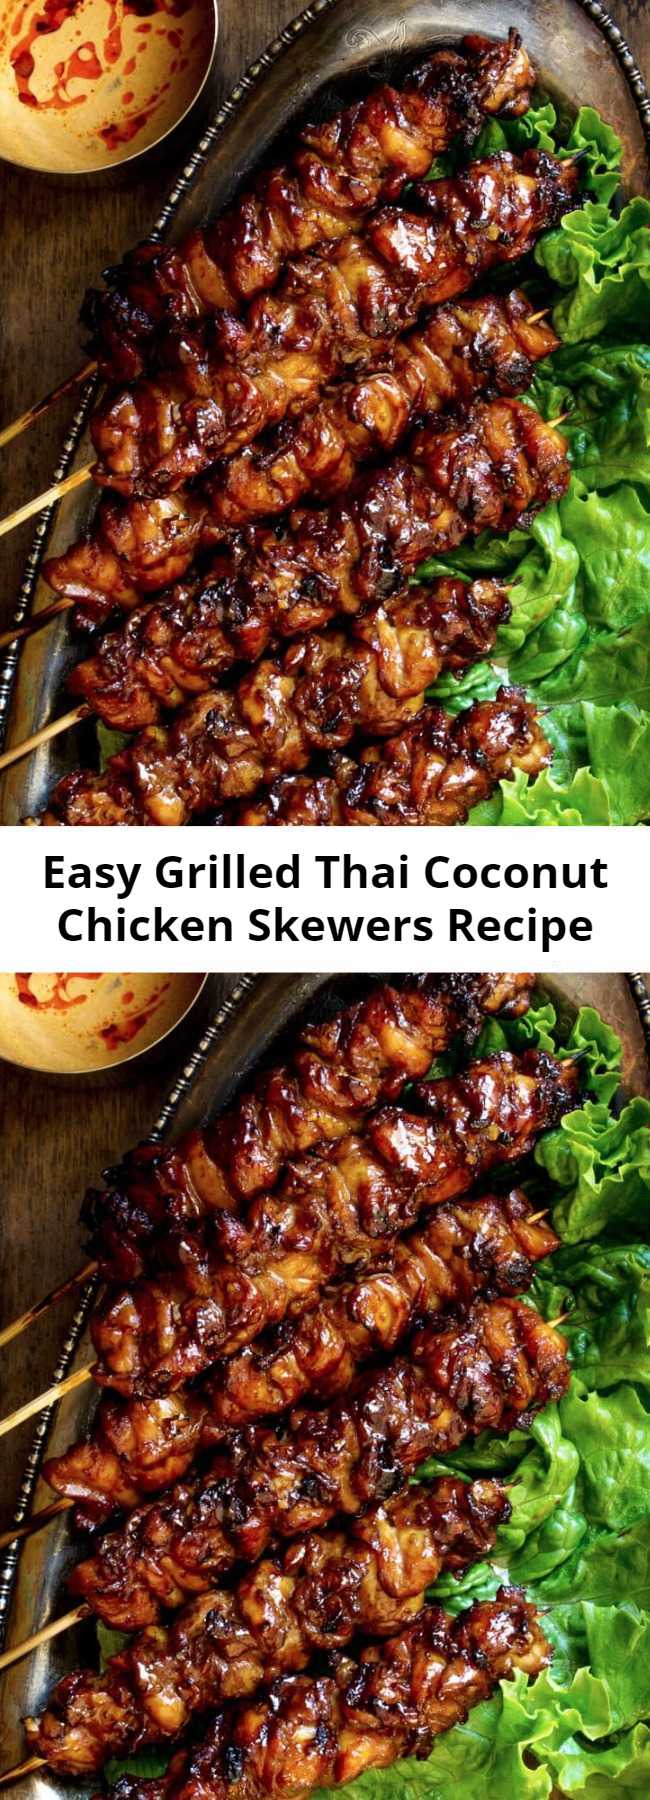 Easy Grilled Thai Coconut Chicken Skewers Recipe - Smoky grilled chicken skewers recipe, marinated in ginger, garlic, coconut cream and soy sauce. Then finished with a sweet coconut cream glaze and served with a simple peanut sauce. Big on flavor, super easy to throw together!